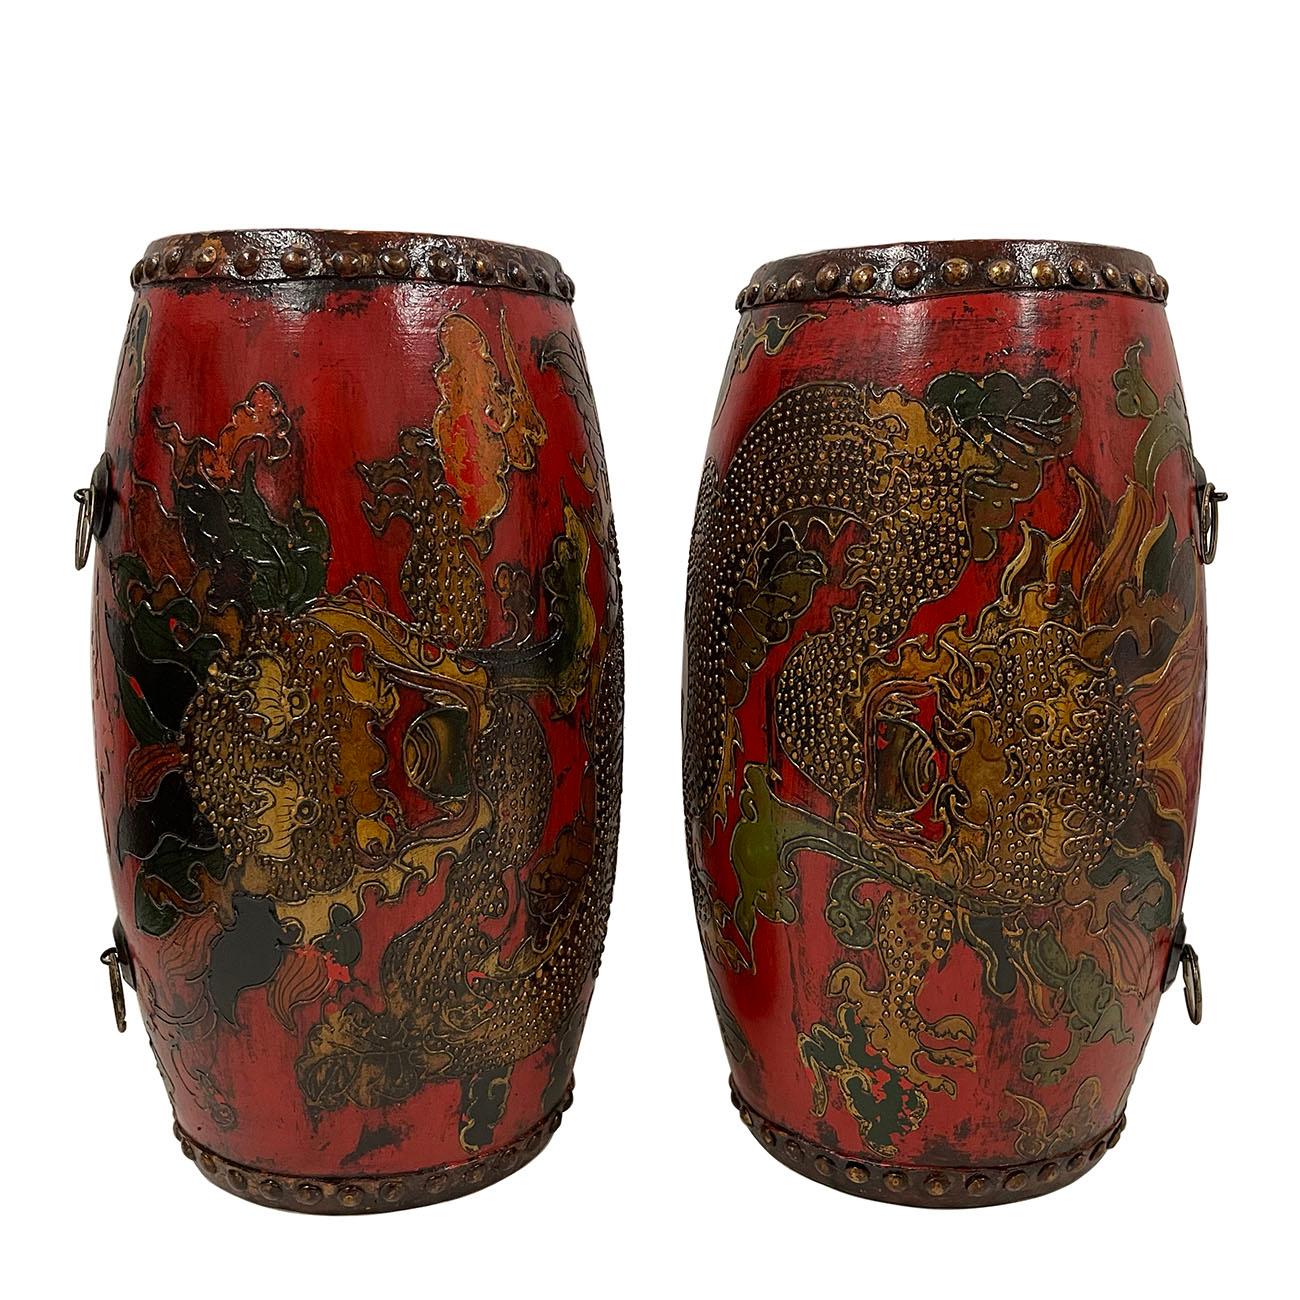 This Gorgeous pair of Antique Tibetan Drums have many years history but it still maintained it's original condition. They are all hand made from wood and leather. There are beautiful hand painting of Tibetan folks arts, dragon, clouds on the side